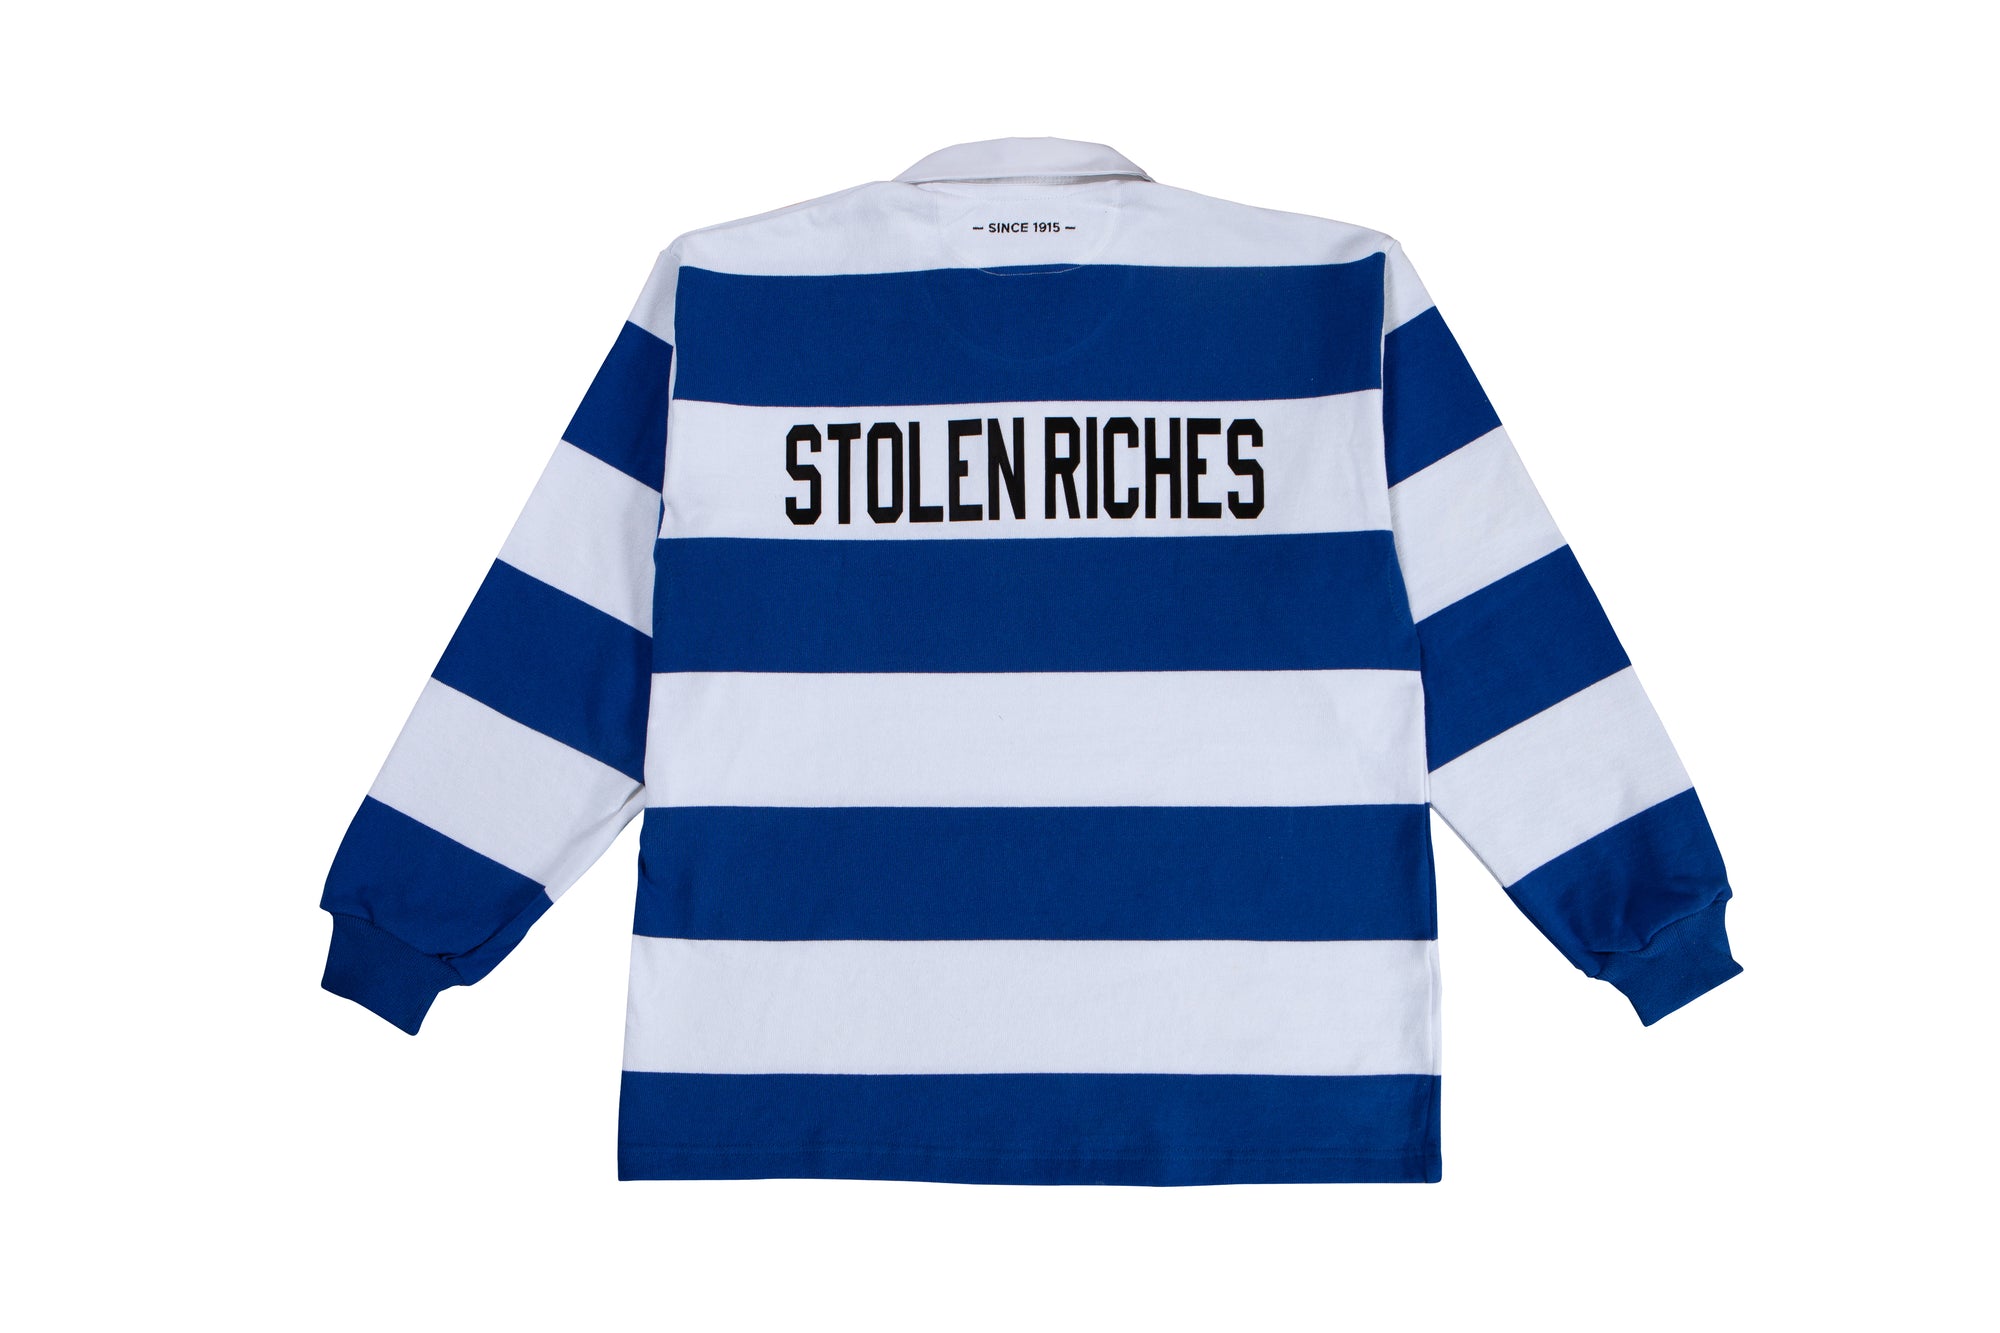 Royal Blue and White Stripe Rugby Shirt